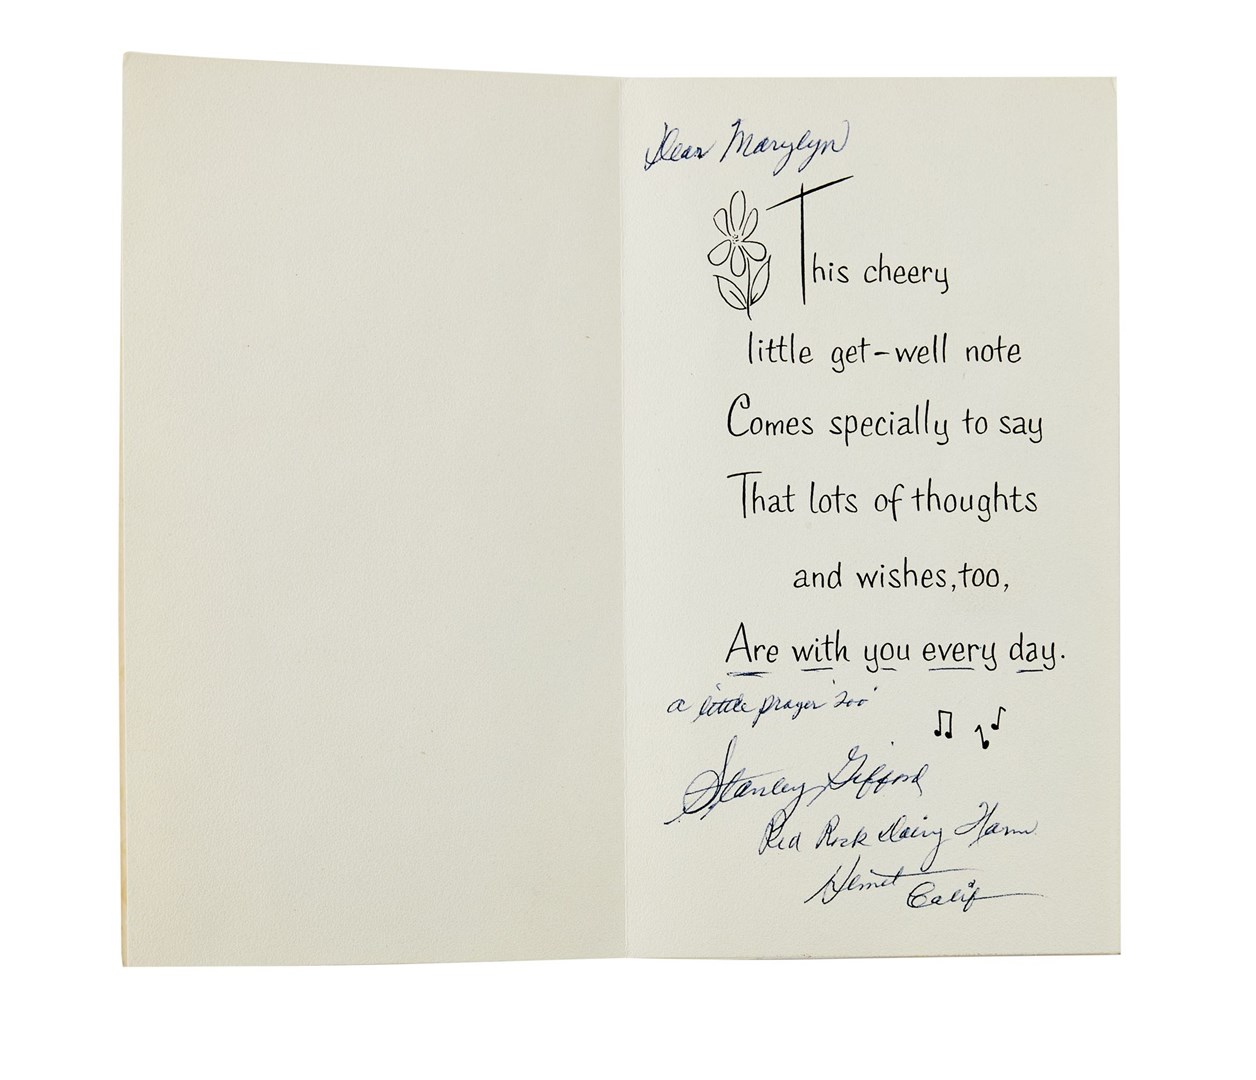 The card comes from Monroe’s personal archive and was sent by her father Stanley Gifford (Julien’s Auctions/PA)